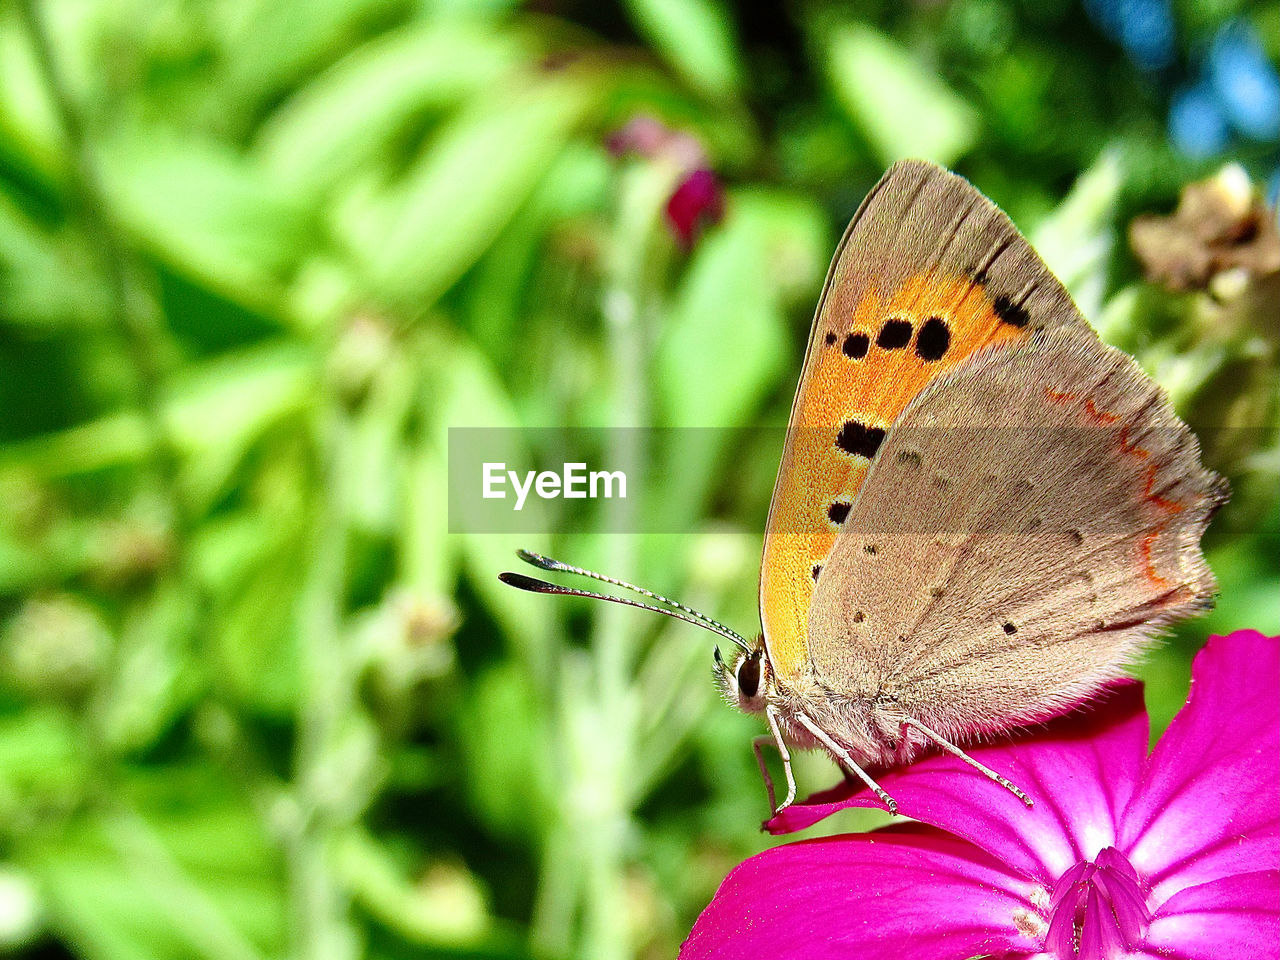 CLOSE-UP OF BUTTERFLY POLLINATING ON PINK FLOWER